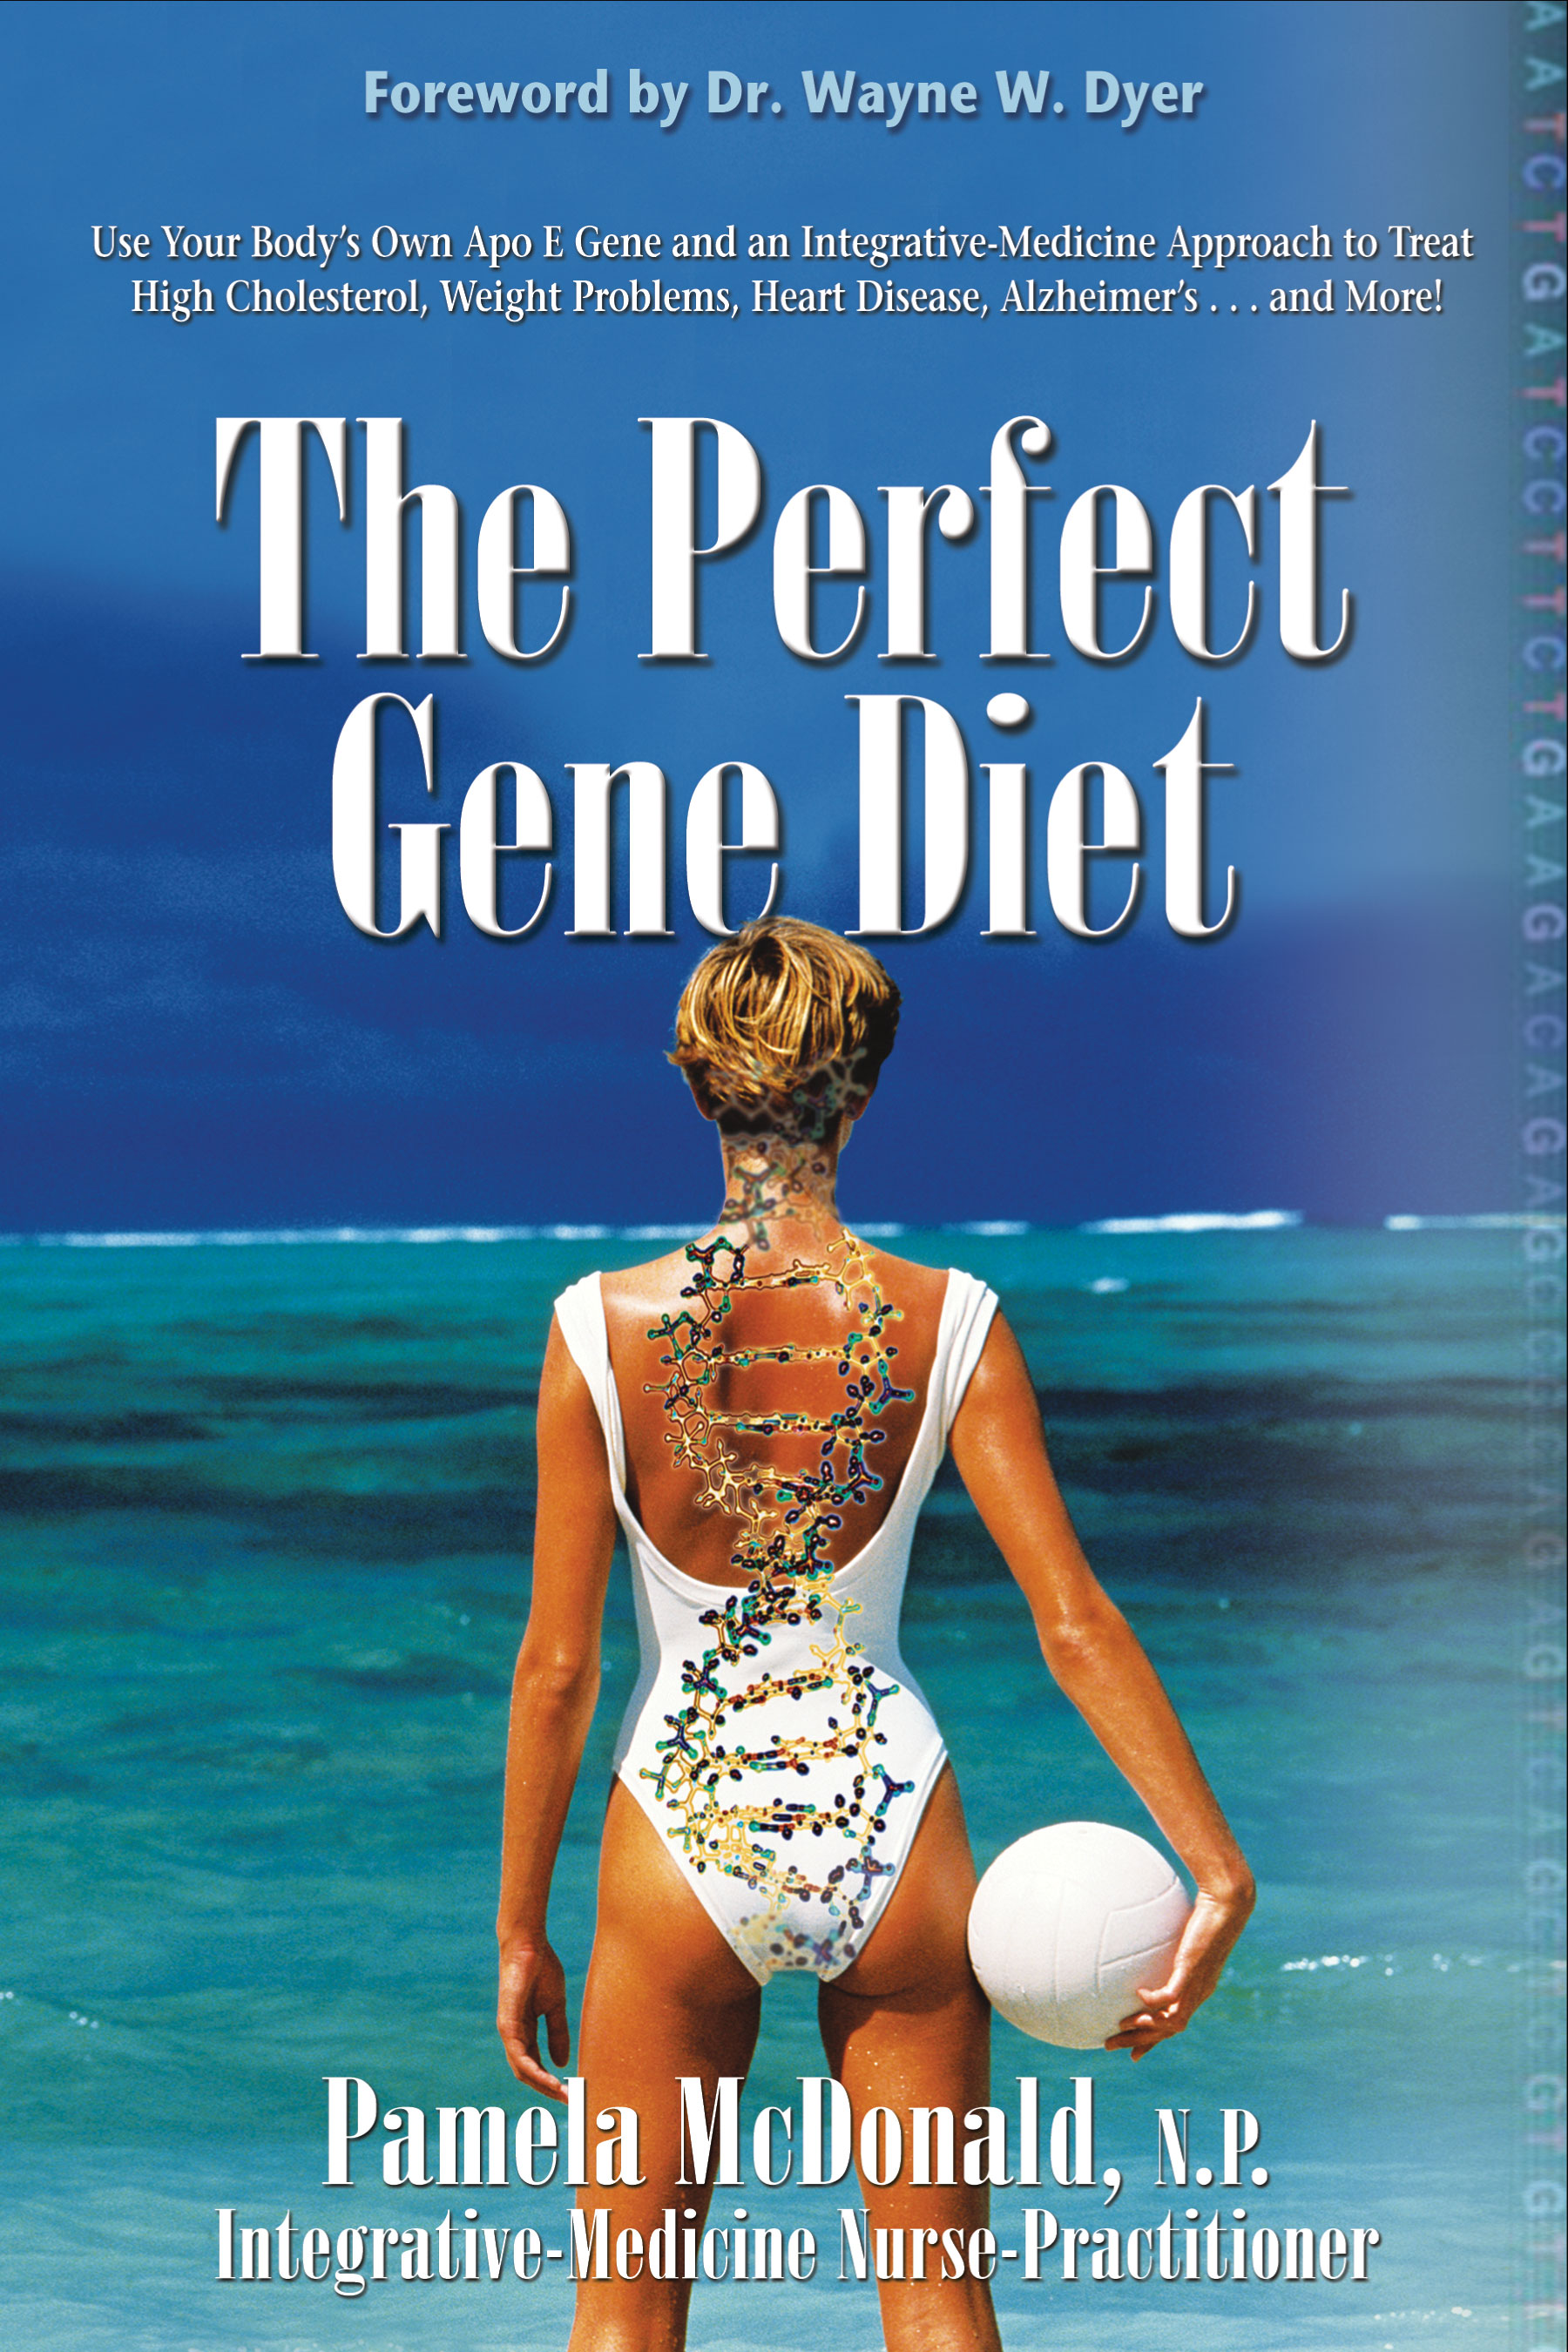 The Perfect Gene Diet book